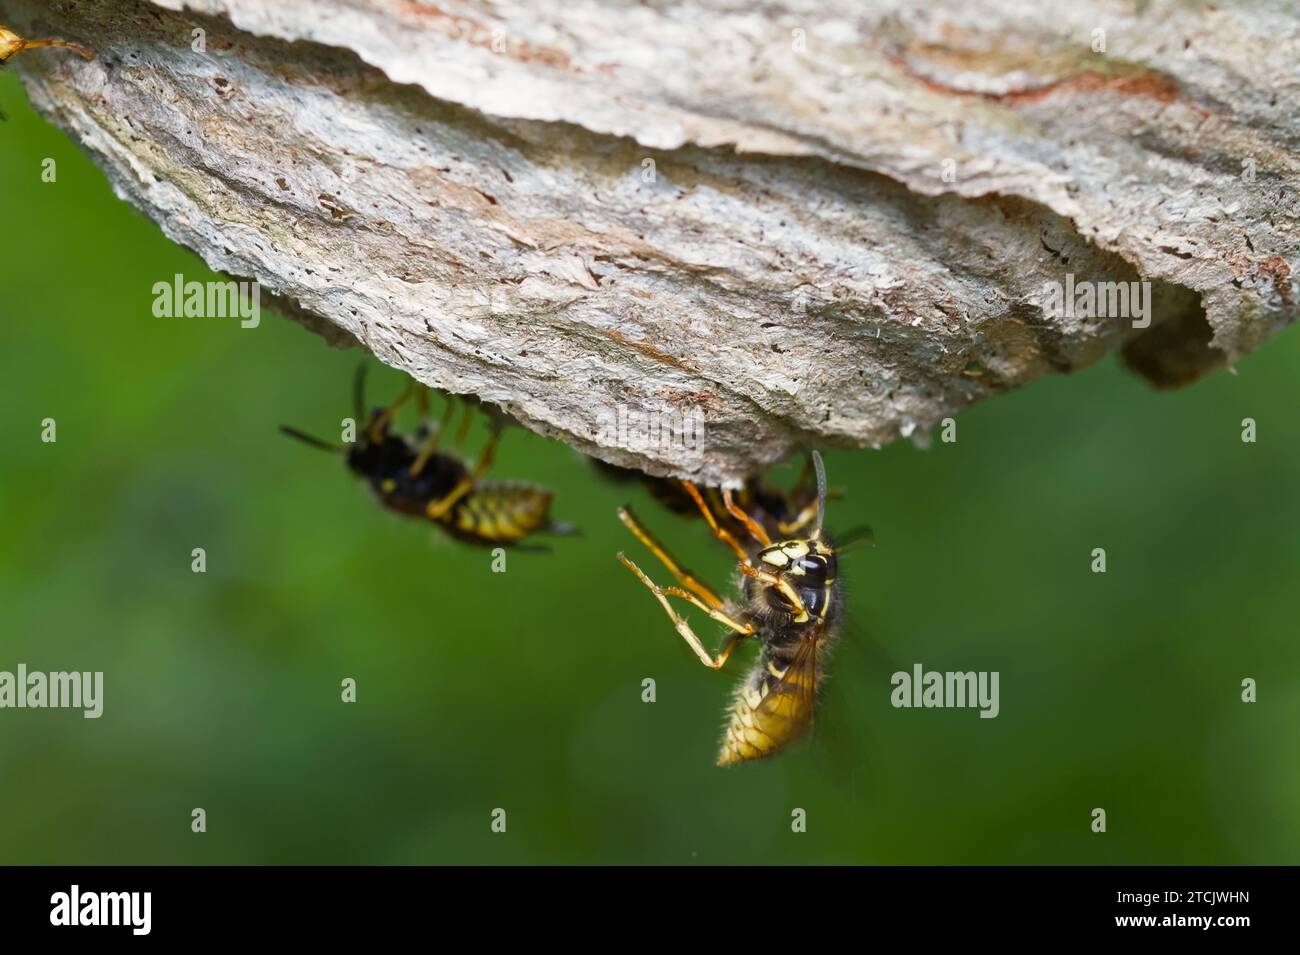 Common Wasp, Vespula vulgaris, Building And Repairing Its Paper Nest Made Of Chewed Up Wood New Forest UK Stock Photo